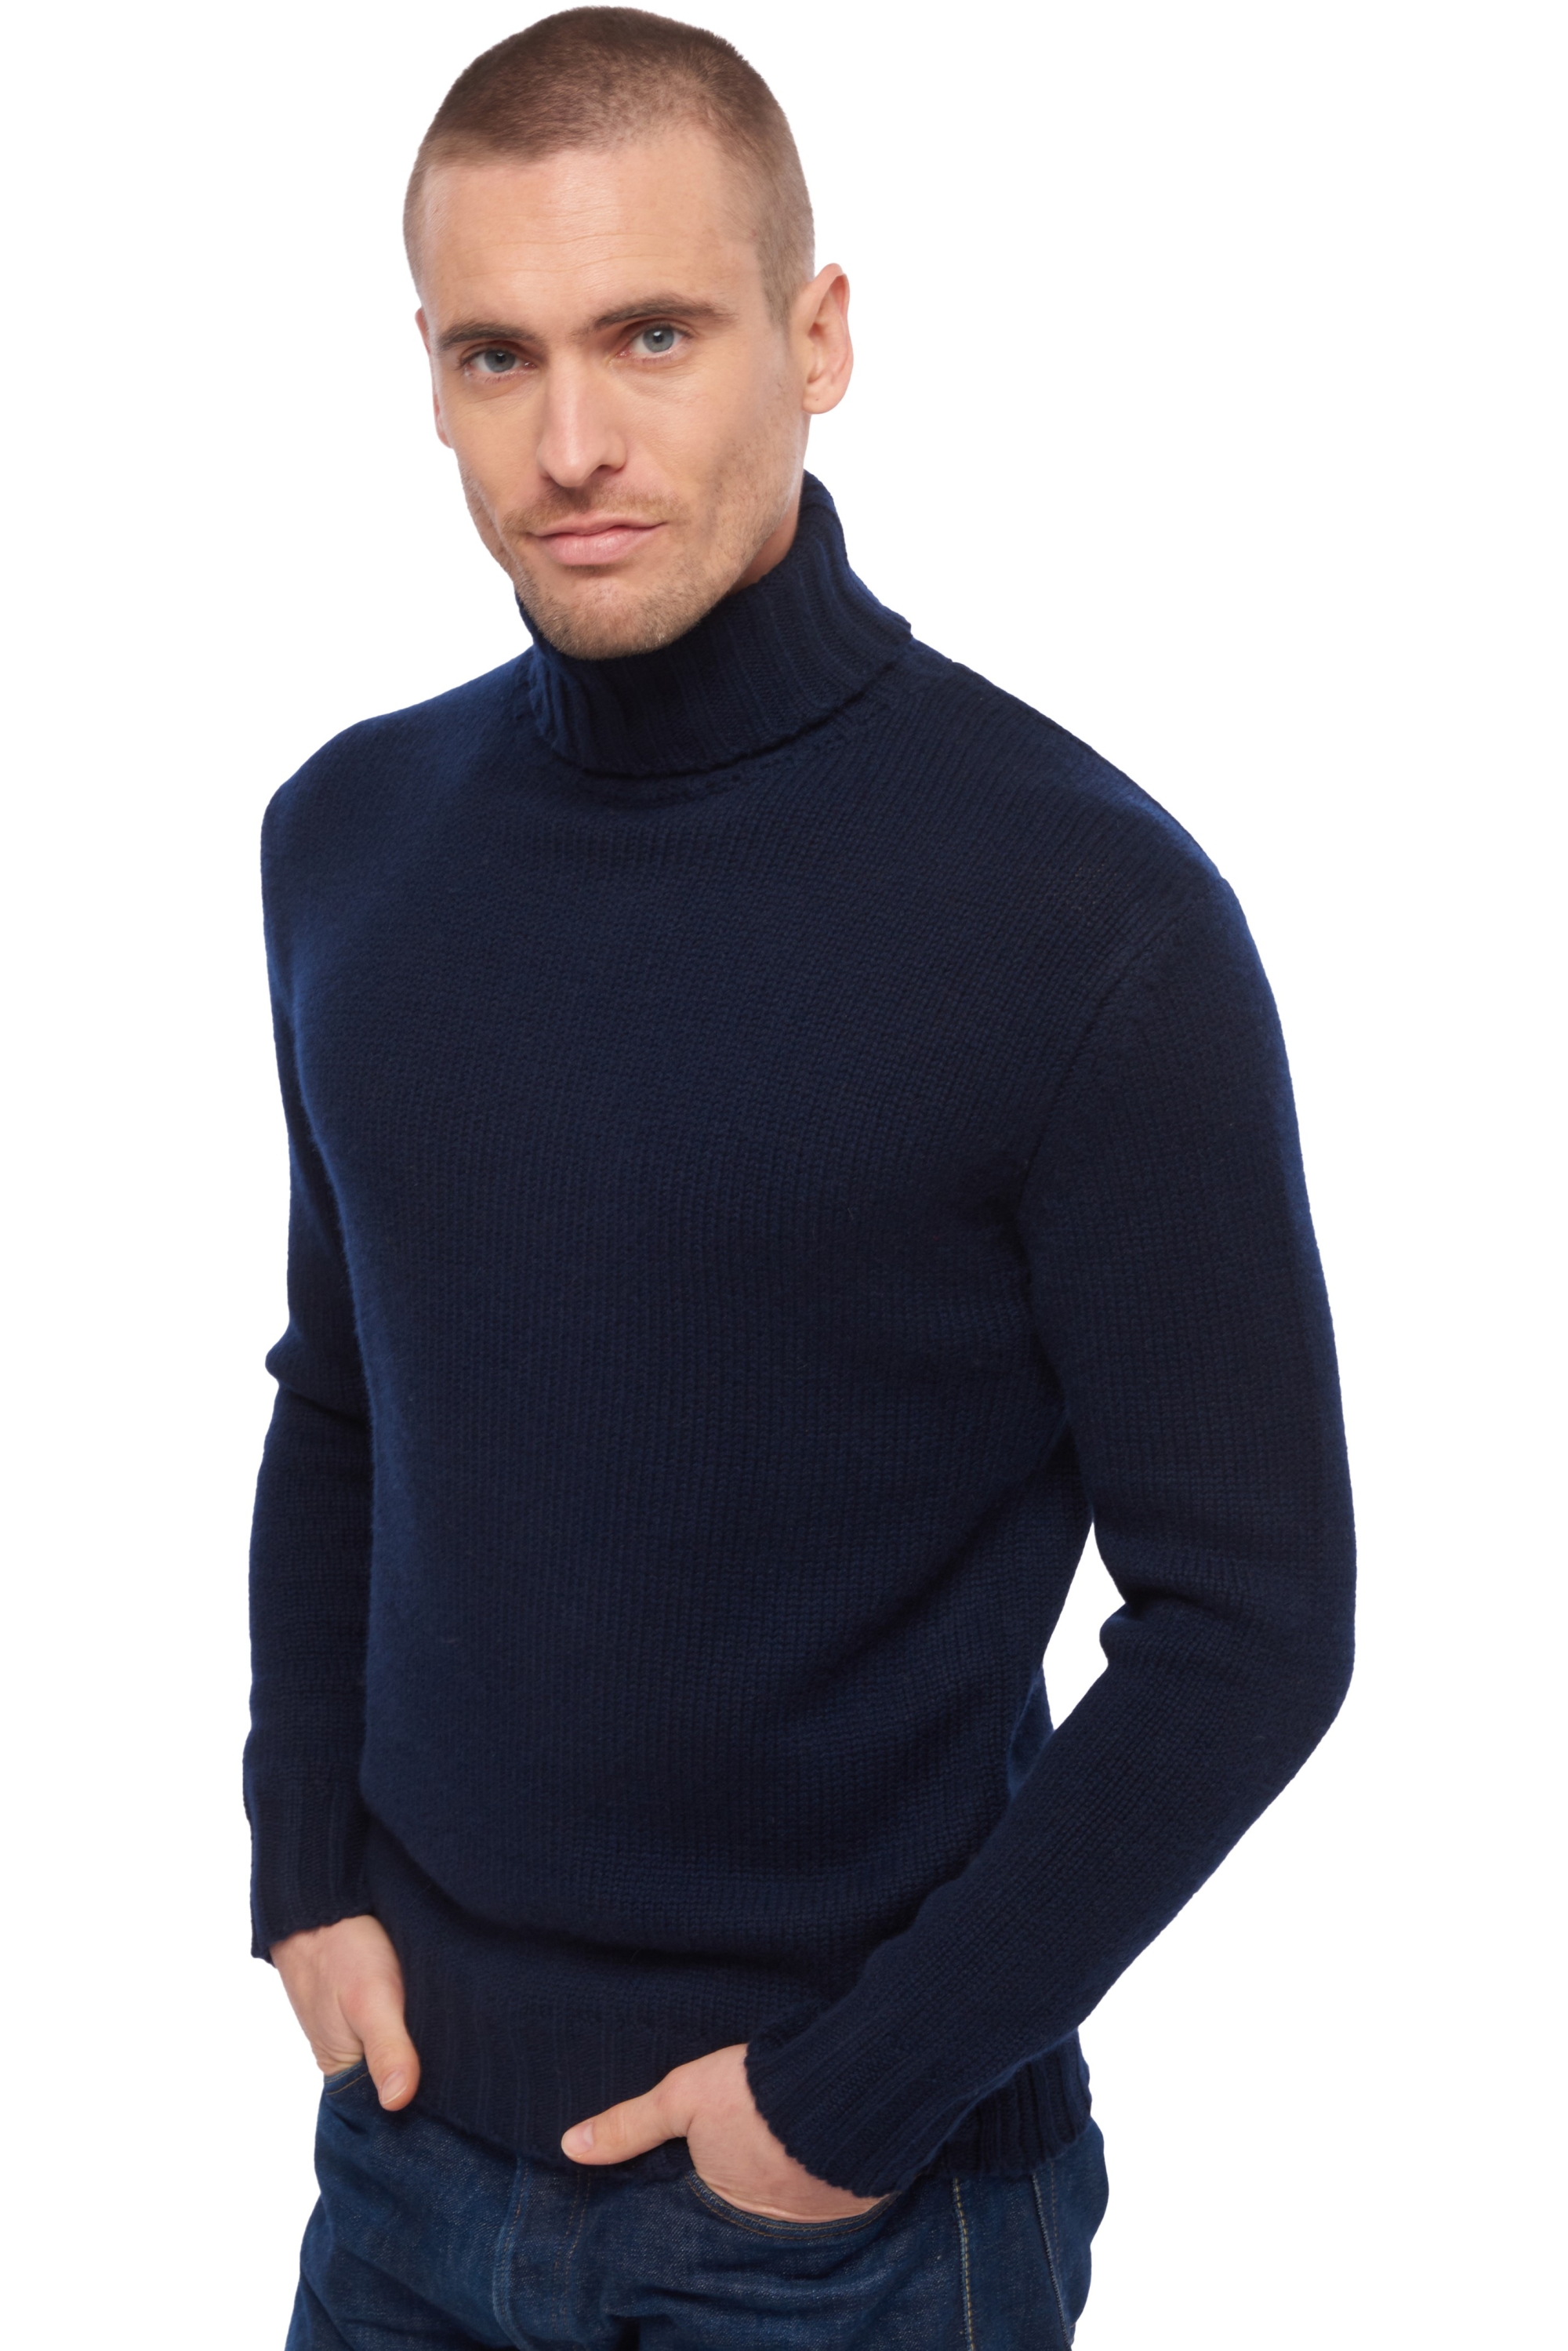 Cachemire pull homme col roule achille marine fonce xs